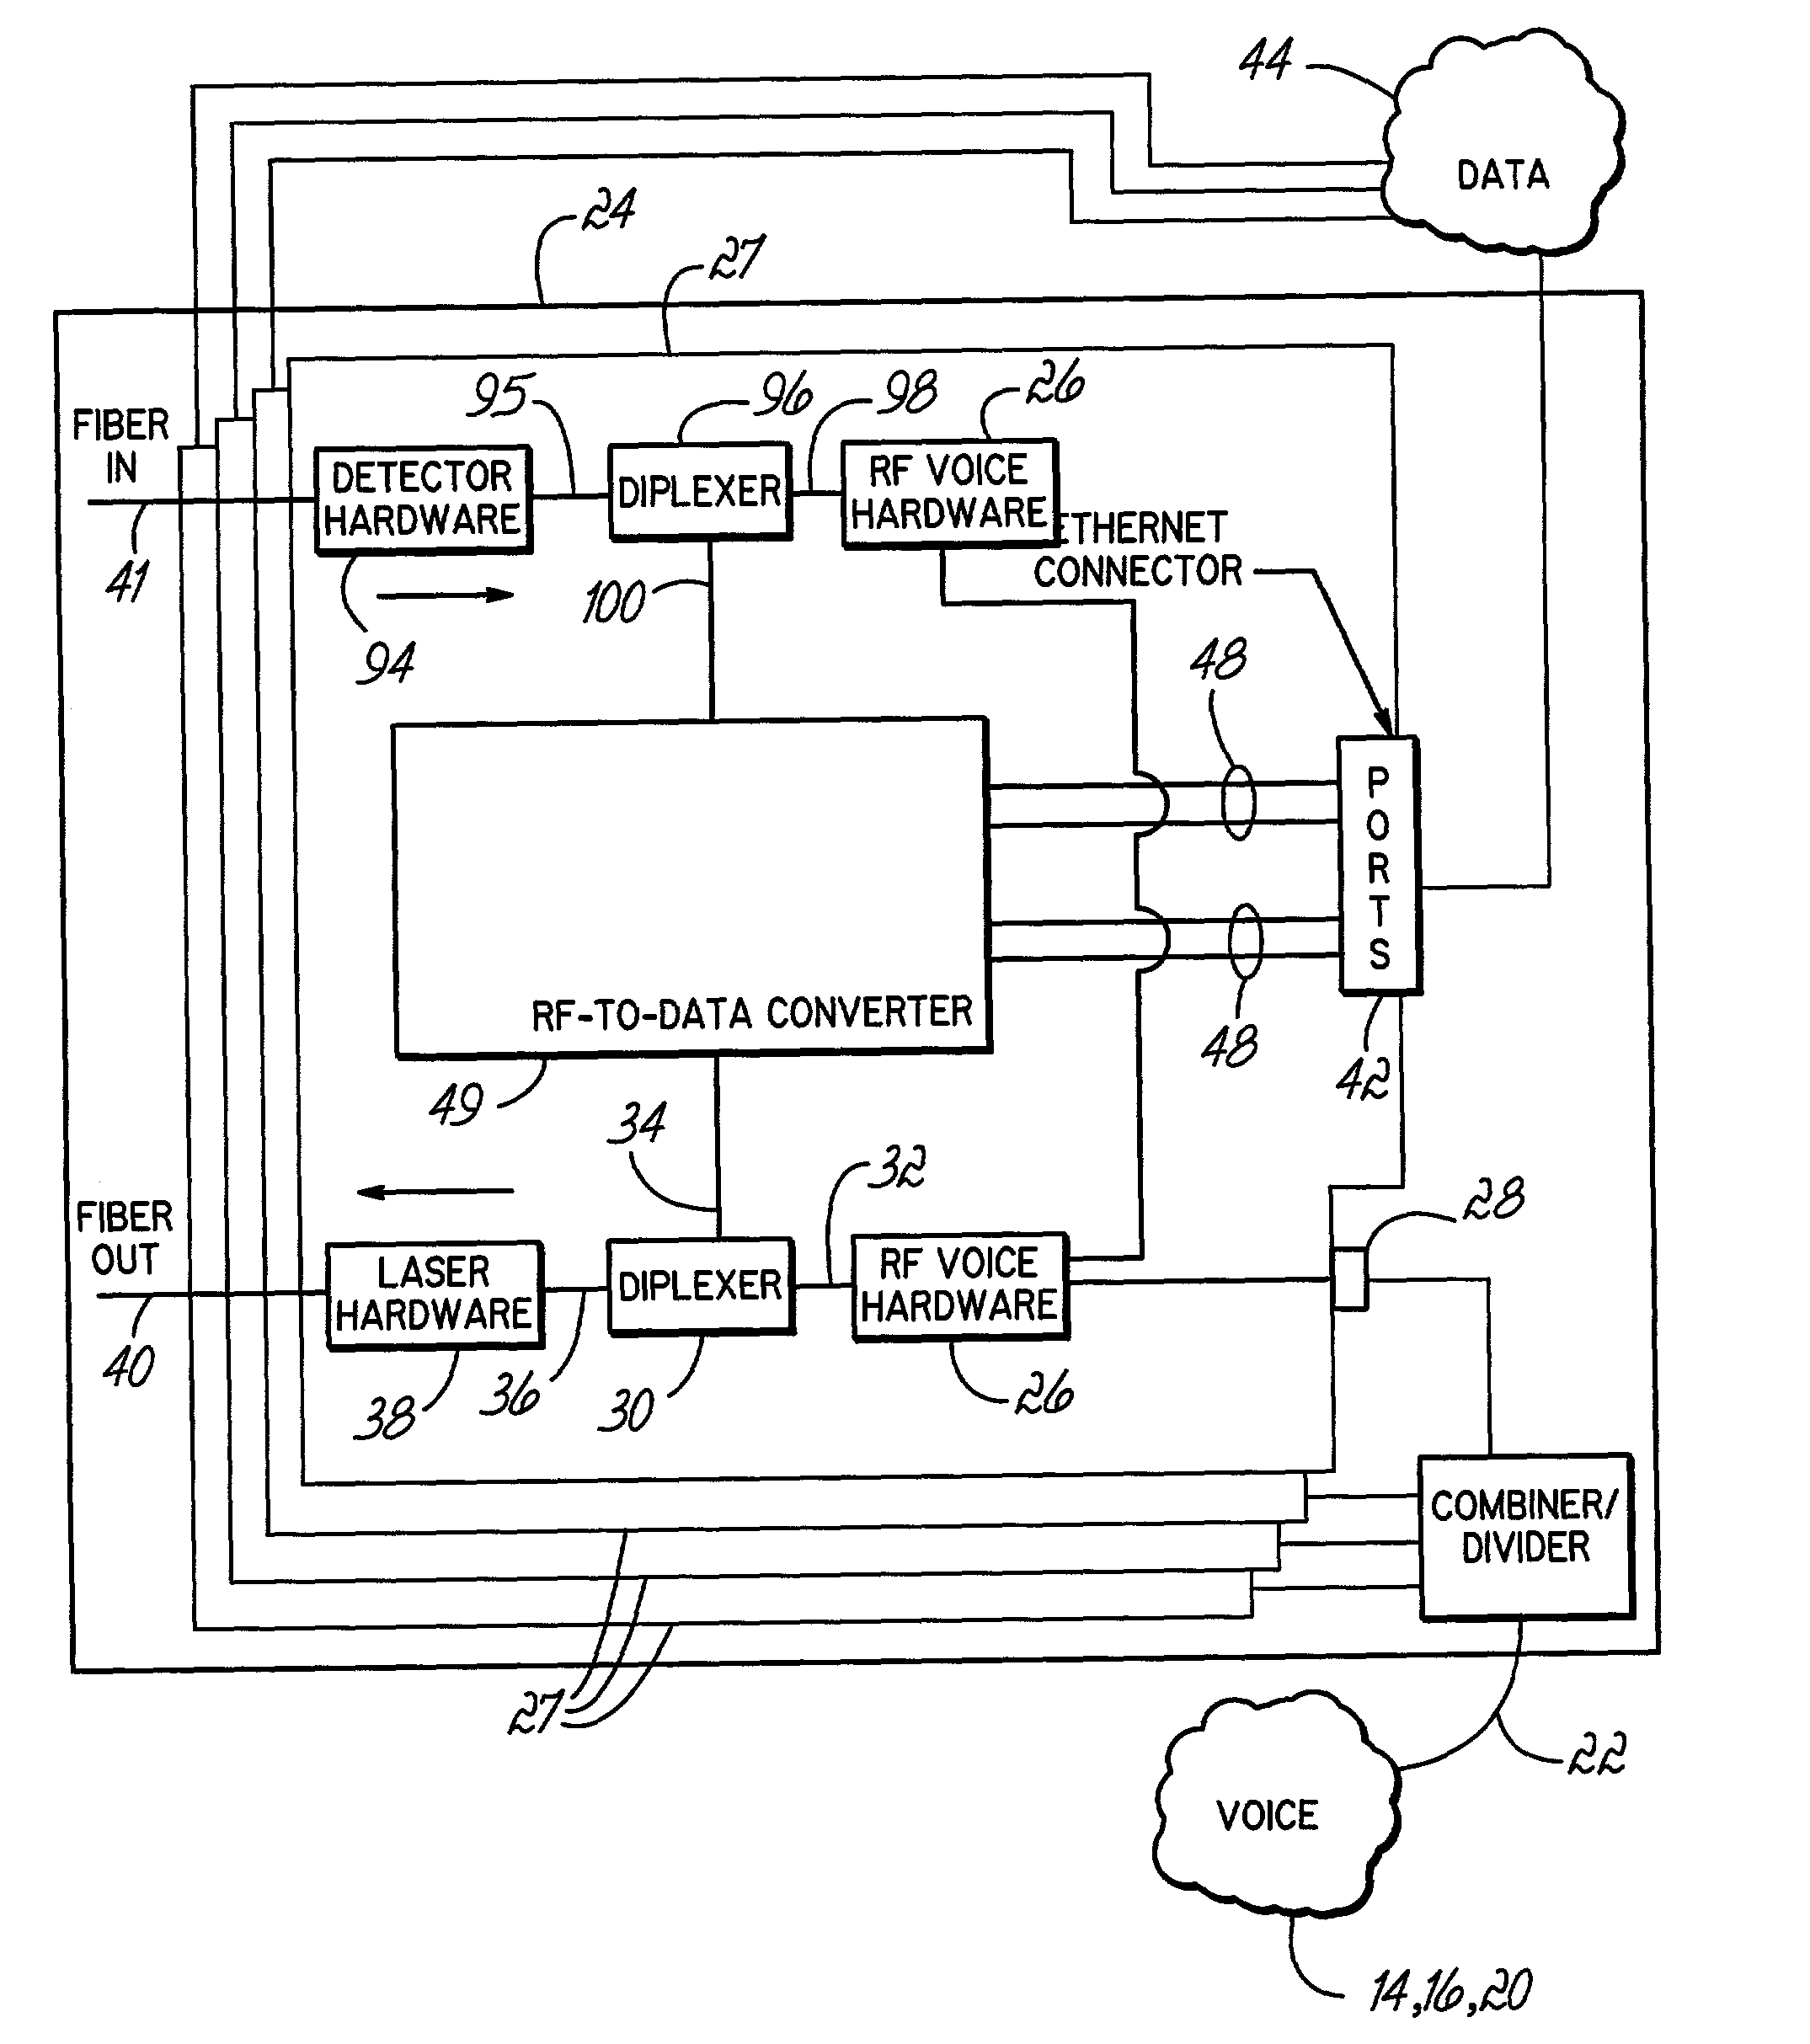 Indoor wireless voice and data distribution system